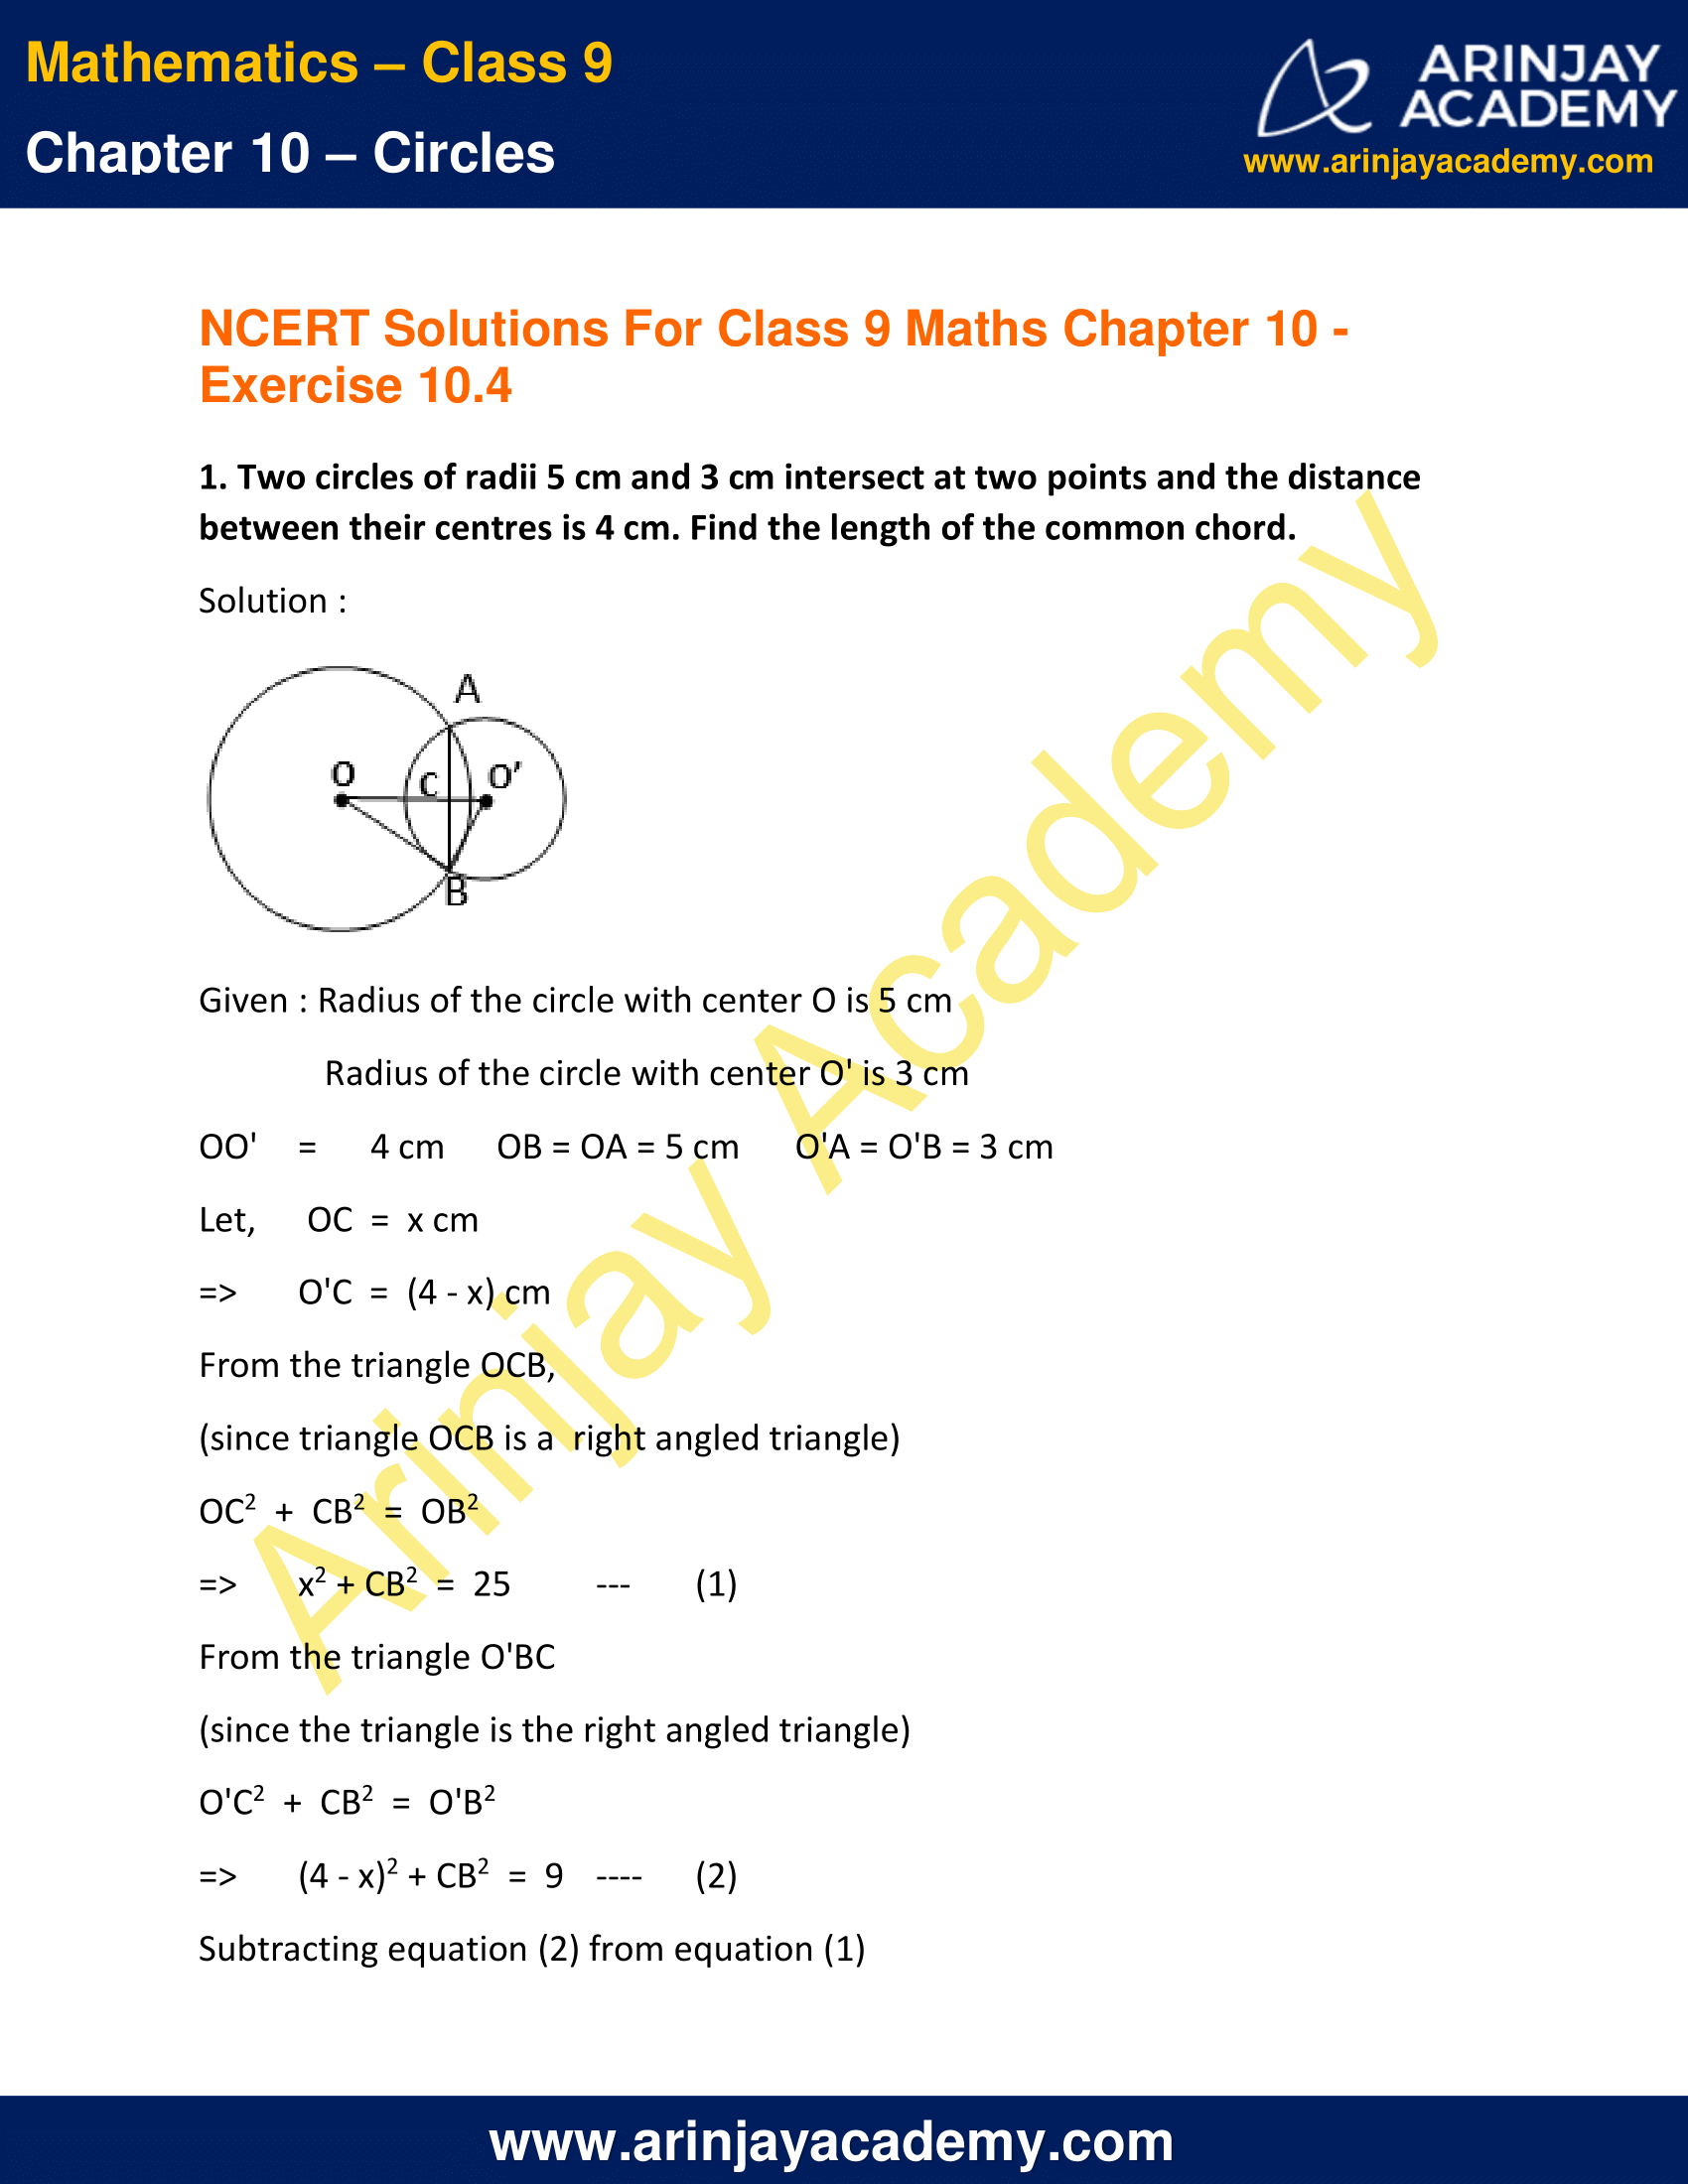 NCERT Solutions for Class 9 Maths Chapter 10 Exercise 10.4 image 1